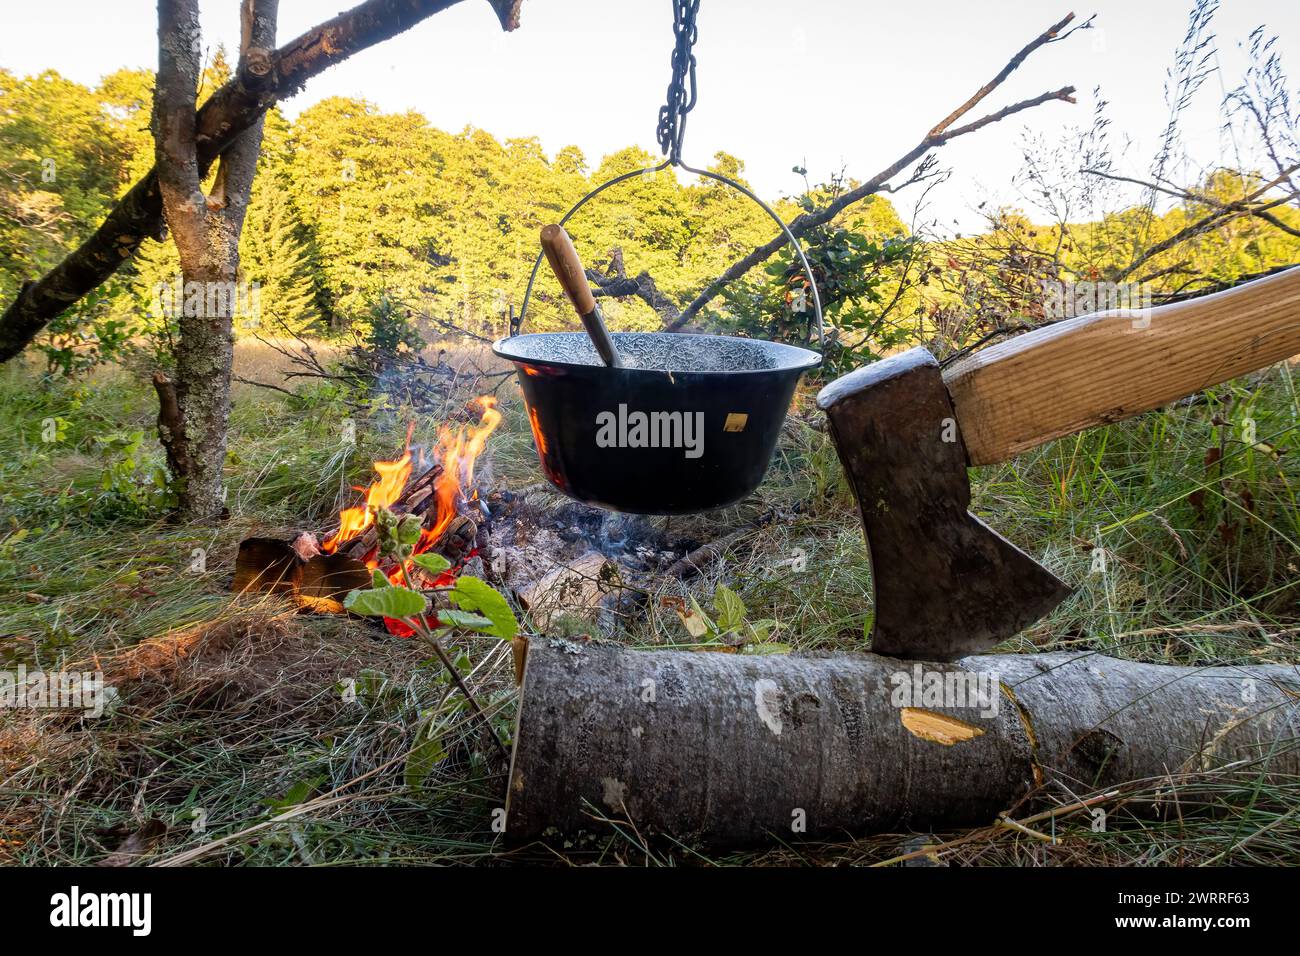 Cooking at campfire with adventure Stock Photo